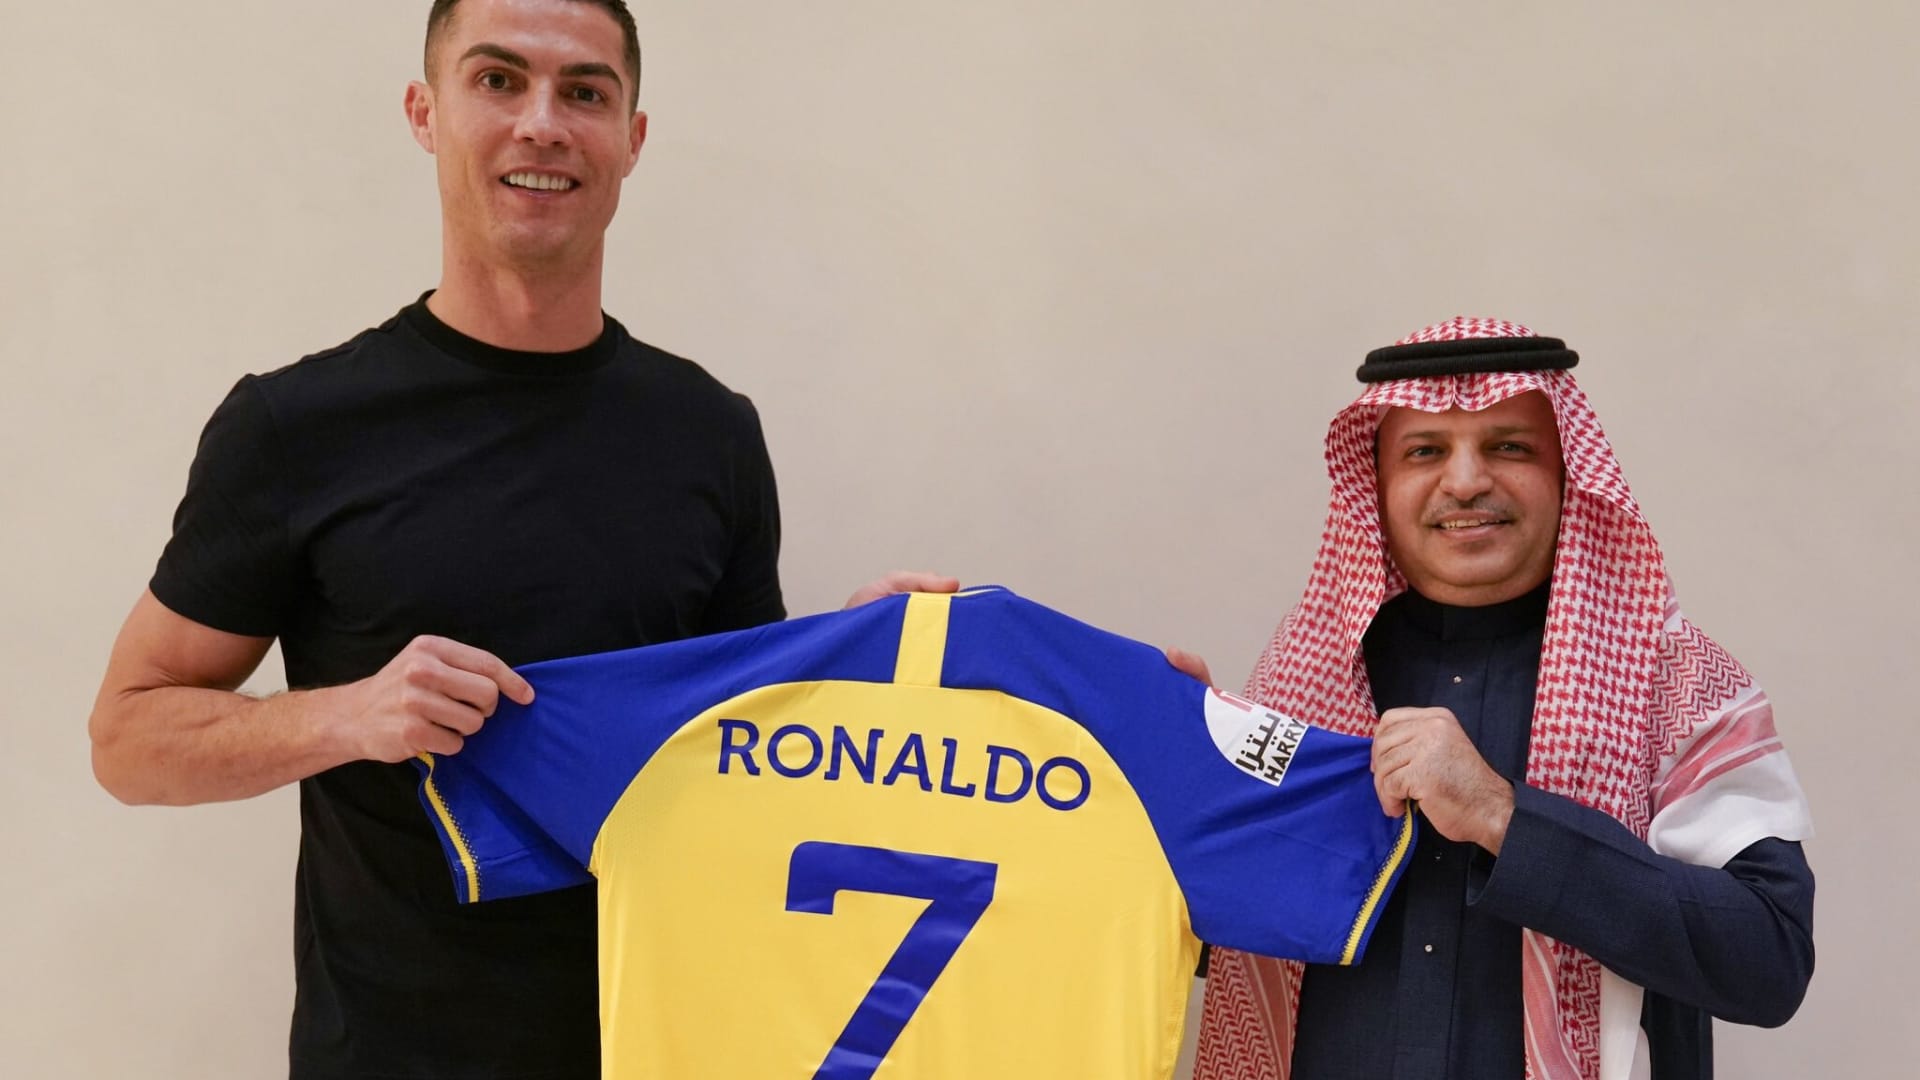 Saudi Arabia’s new love for soccer could cause ripple effects across the sports world